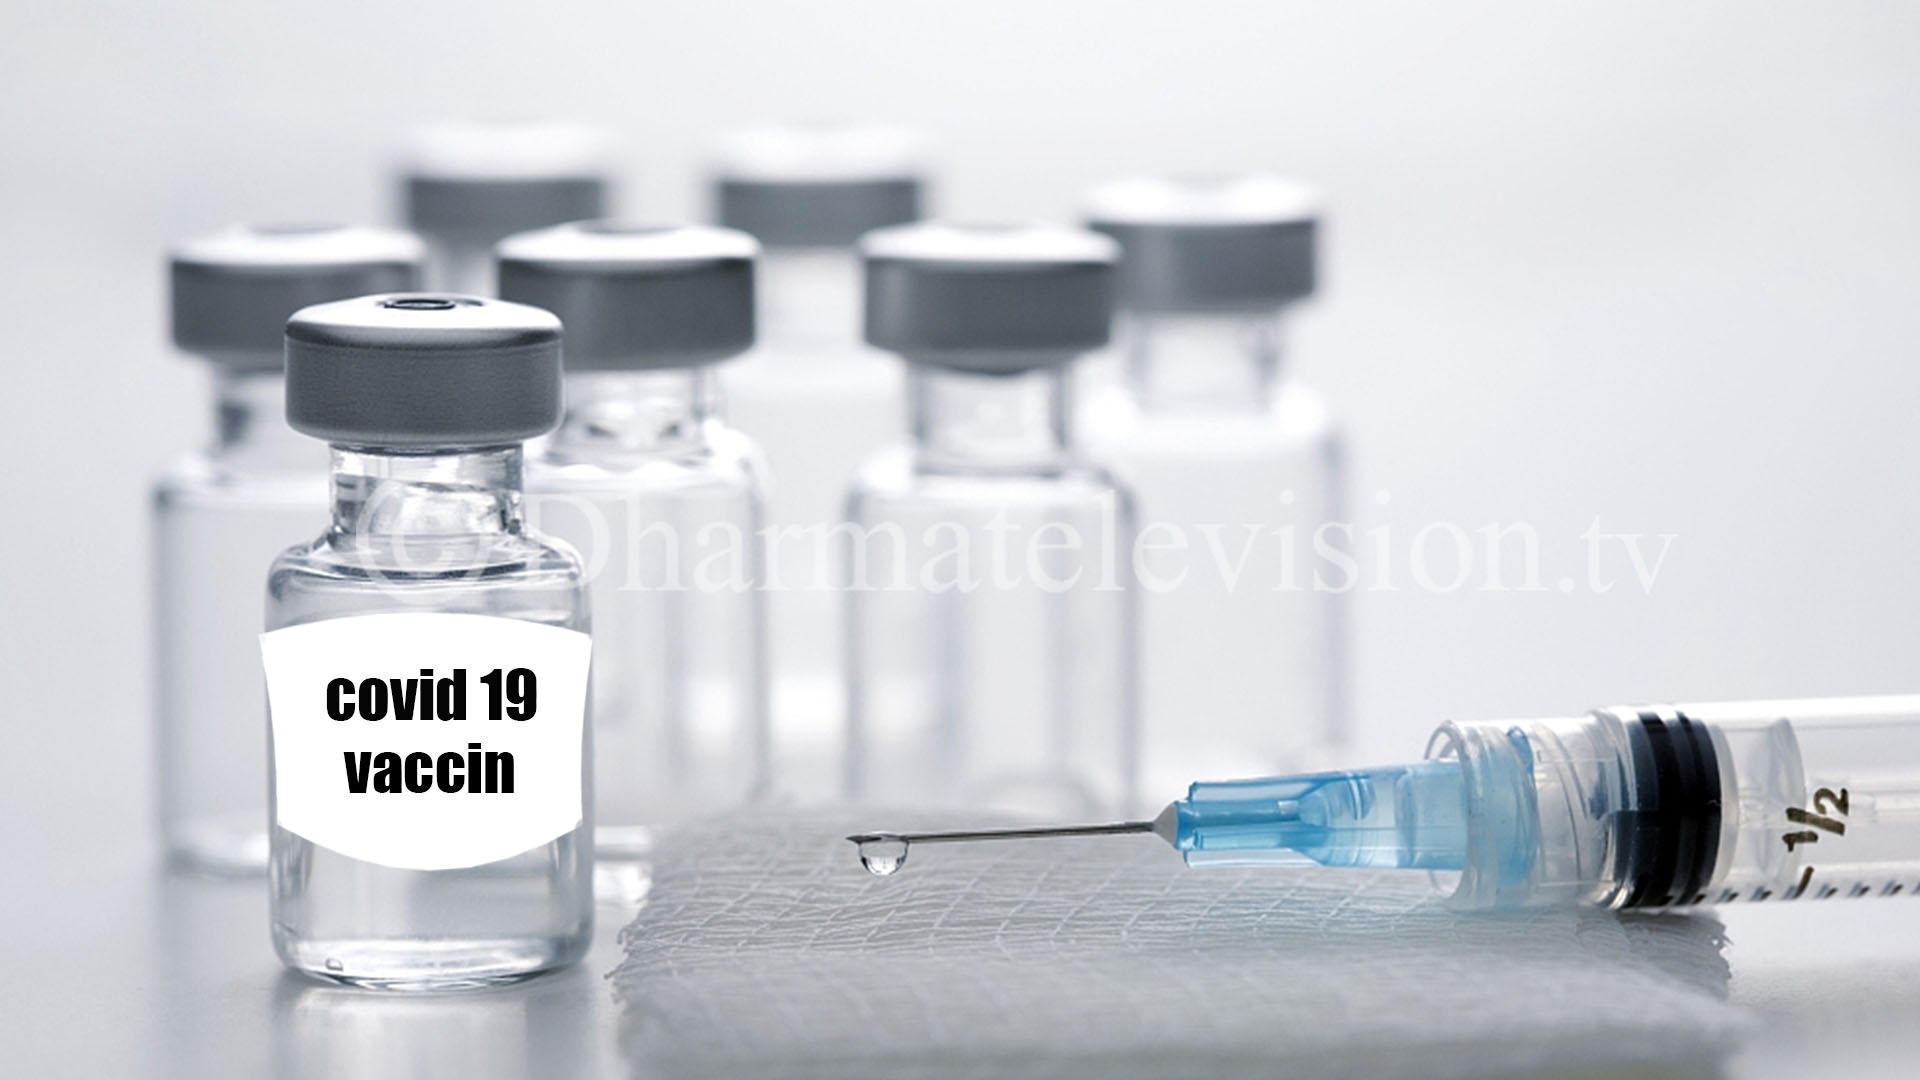 Preparations for the distribution of 6.4 million vaccines in the United States